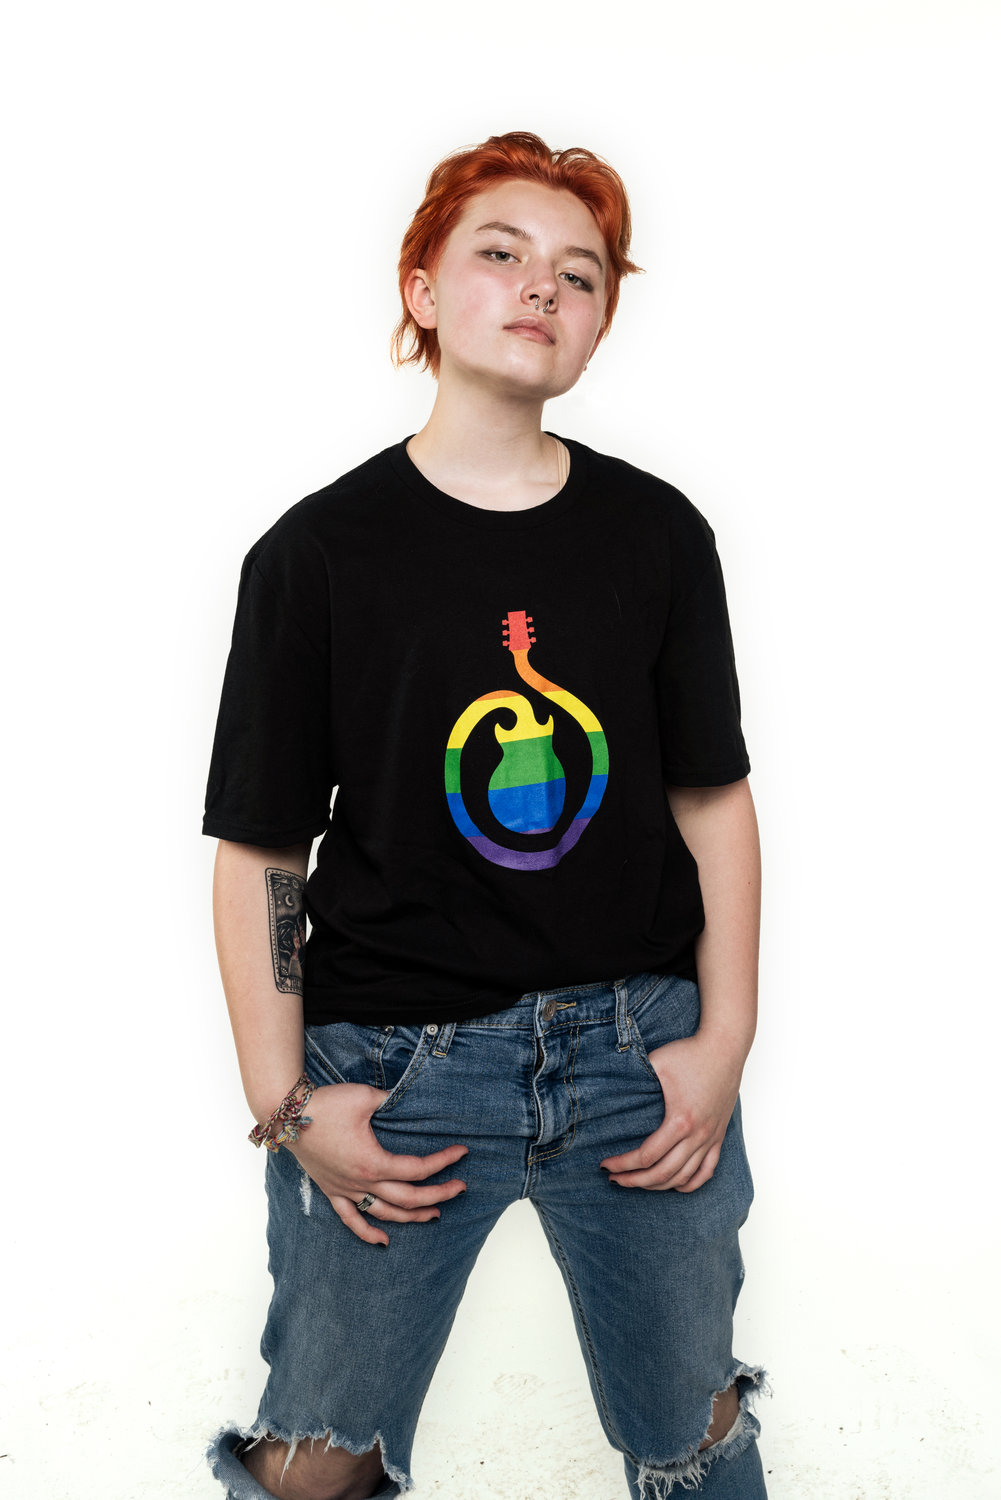 School of Rock Doylestown is currently selling Pride T-shirts at its 88 S. Main St. location. All net proceeds from the shirt sales will benefit The Rainbow Room, a support group that provides free education, counseling, and recreation services for LGBTQ+ tweens/teens in Bucks County.